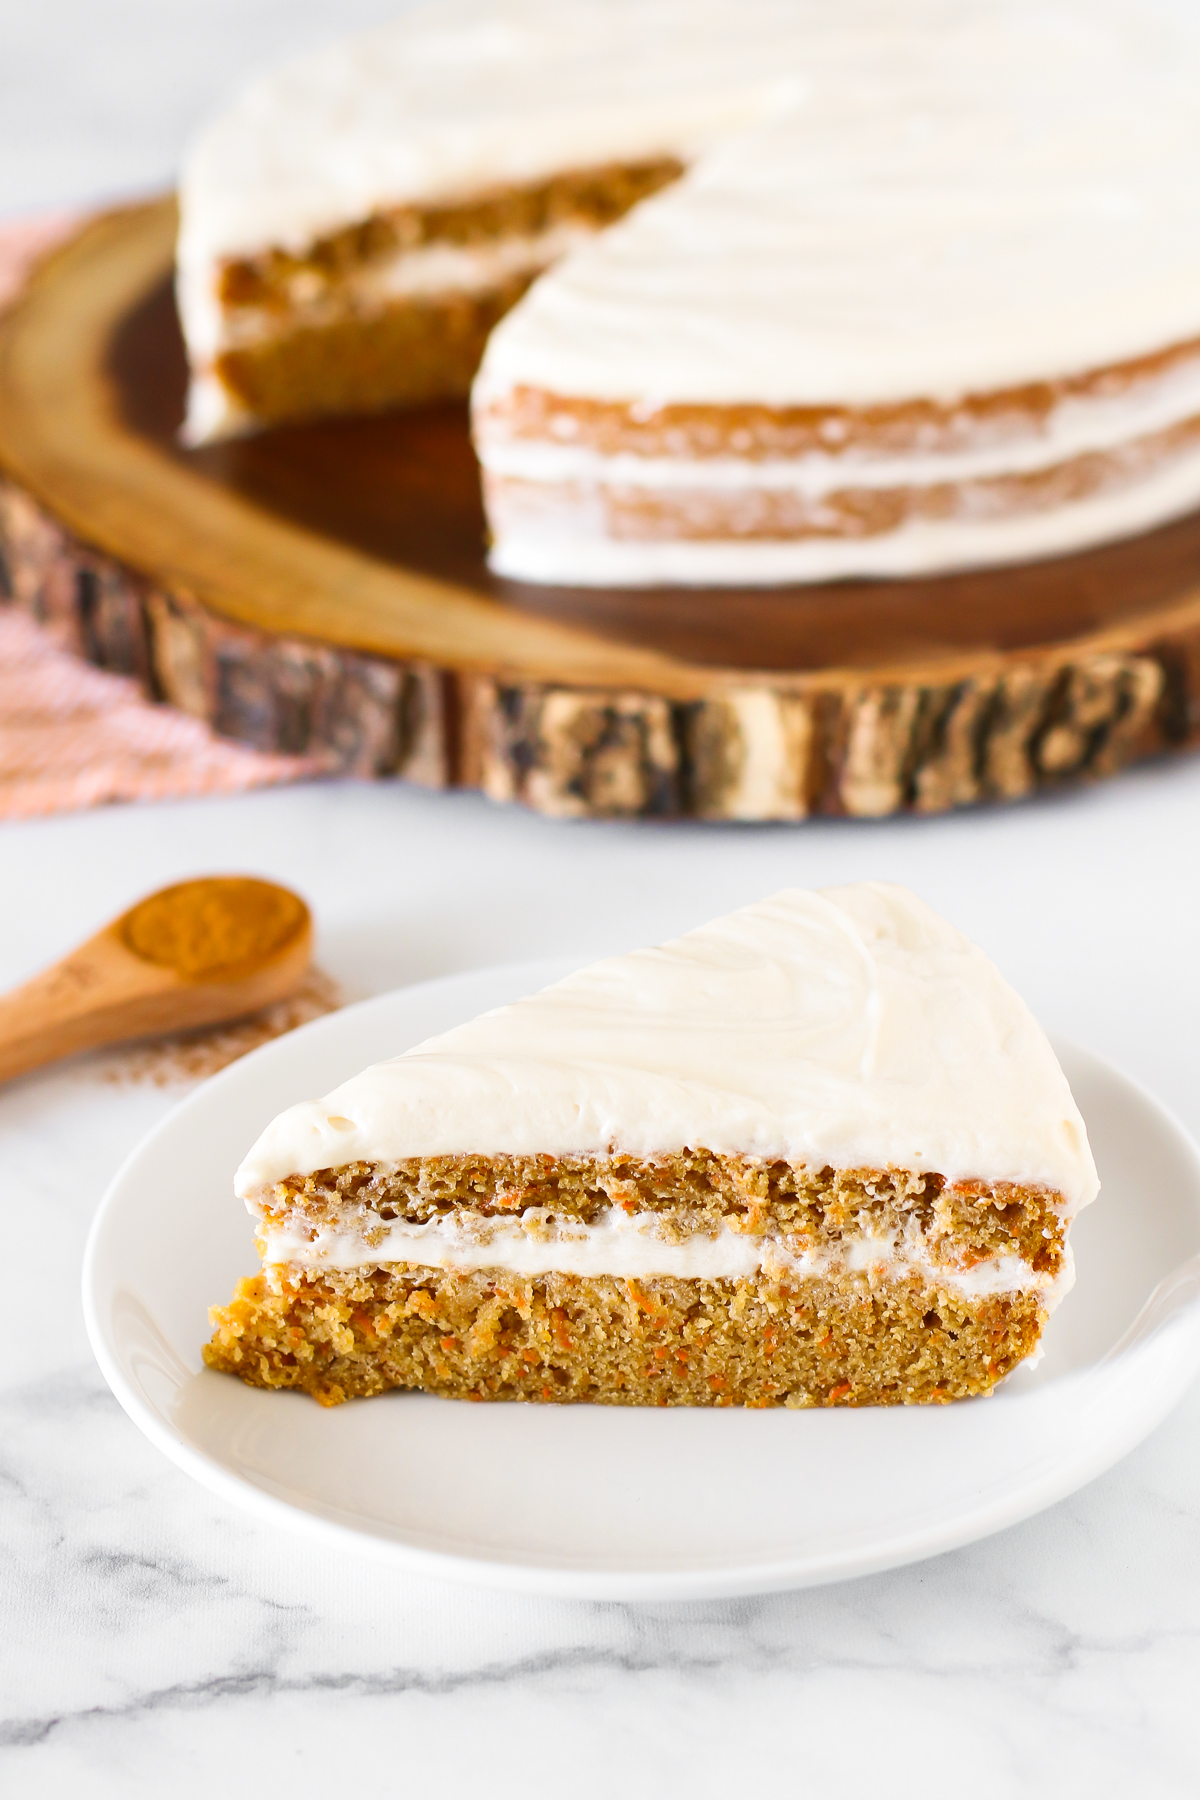 Gluten Free Vegan Carrot Cake. Layers of moist, spiced carrot cake and decadent cream cheese frosting. The classic cake made allergen free!